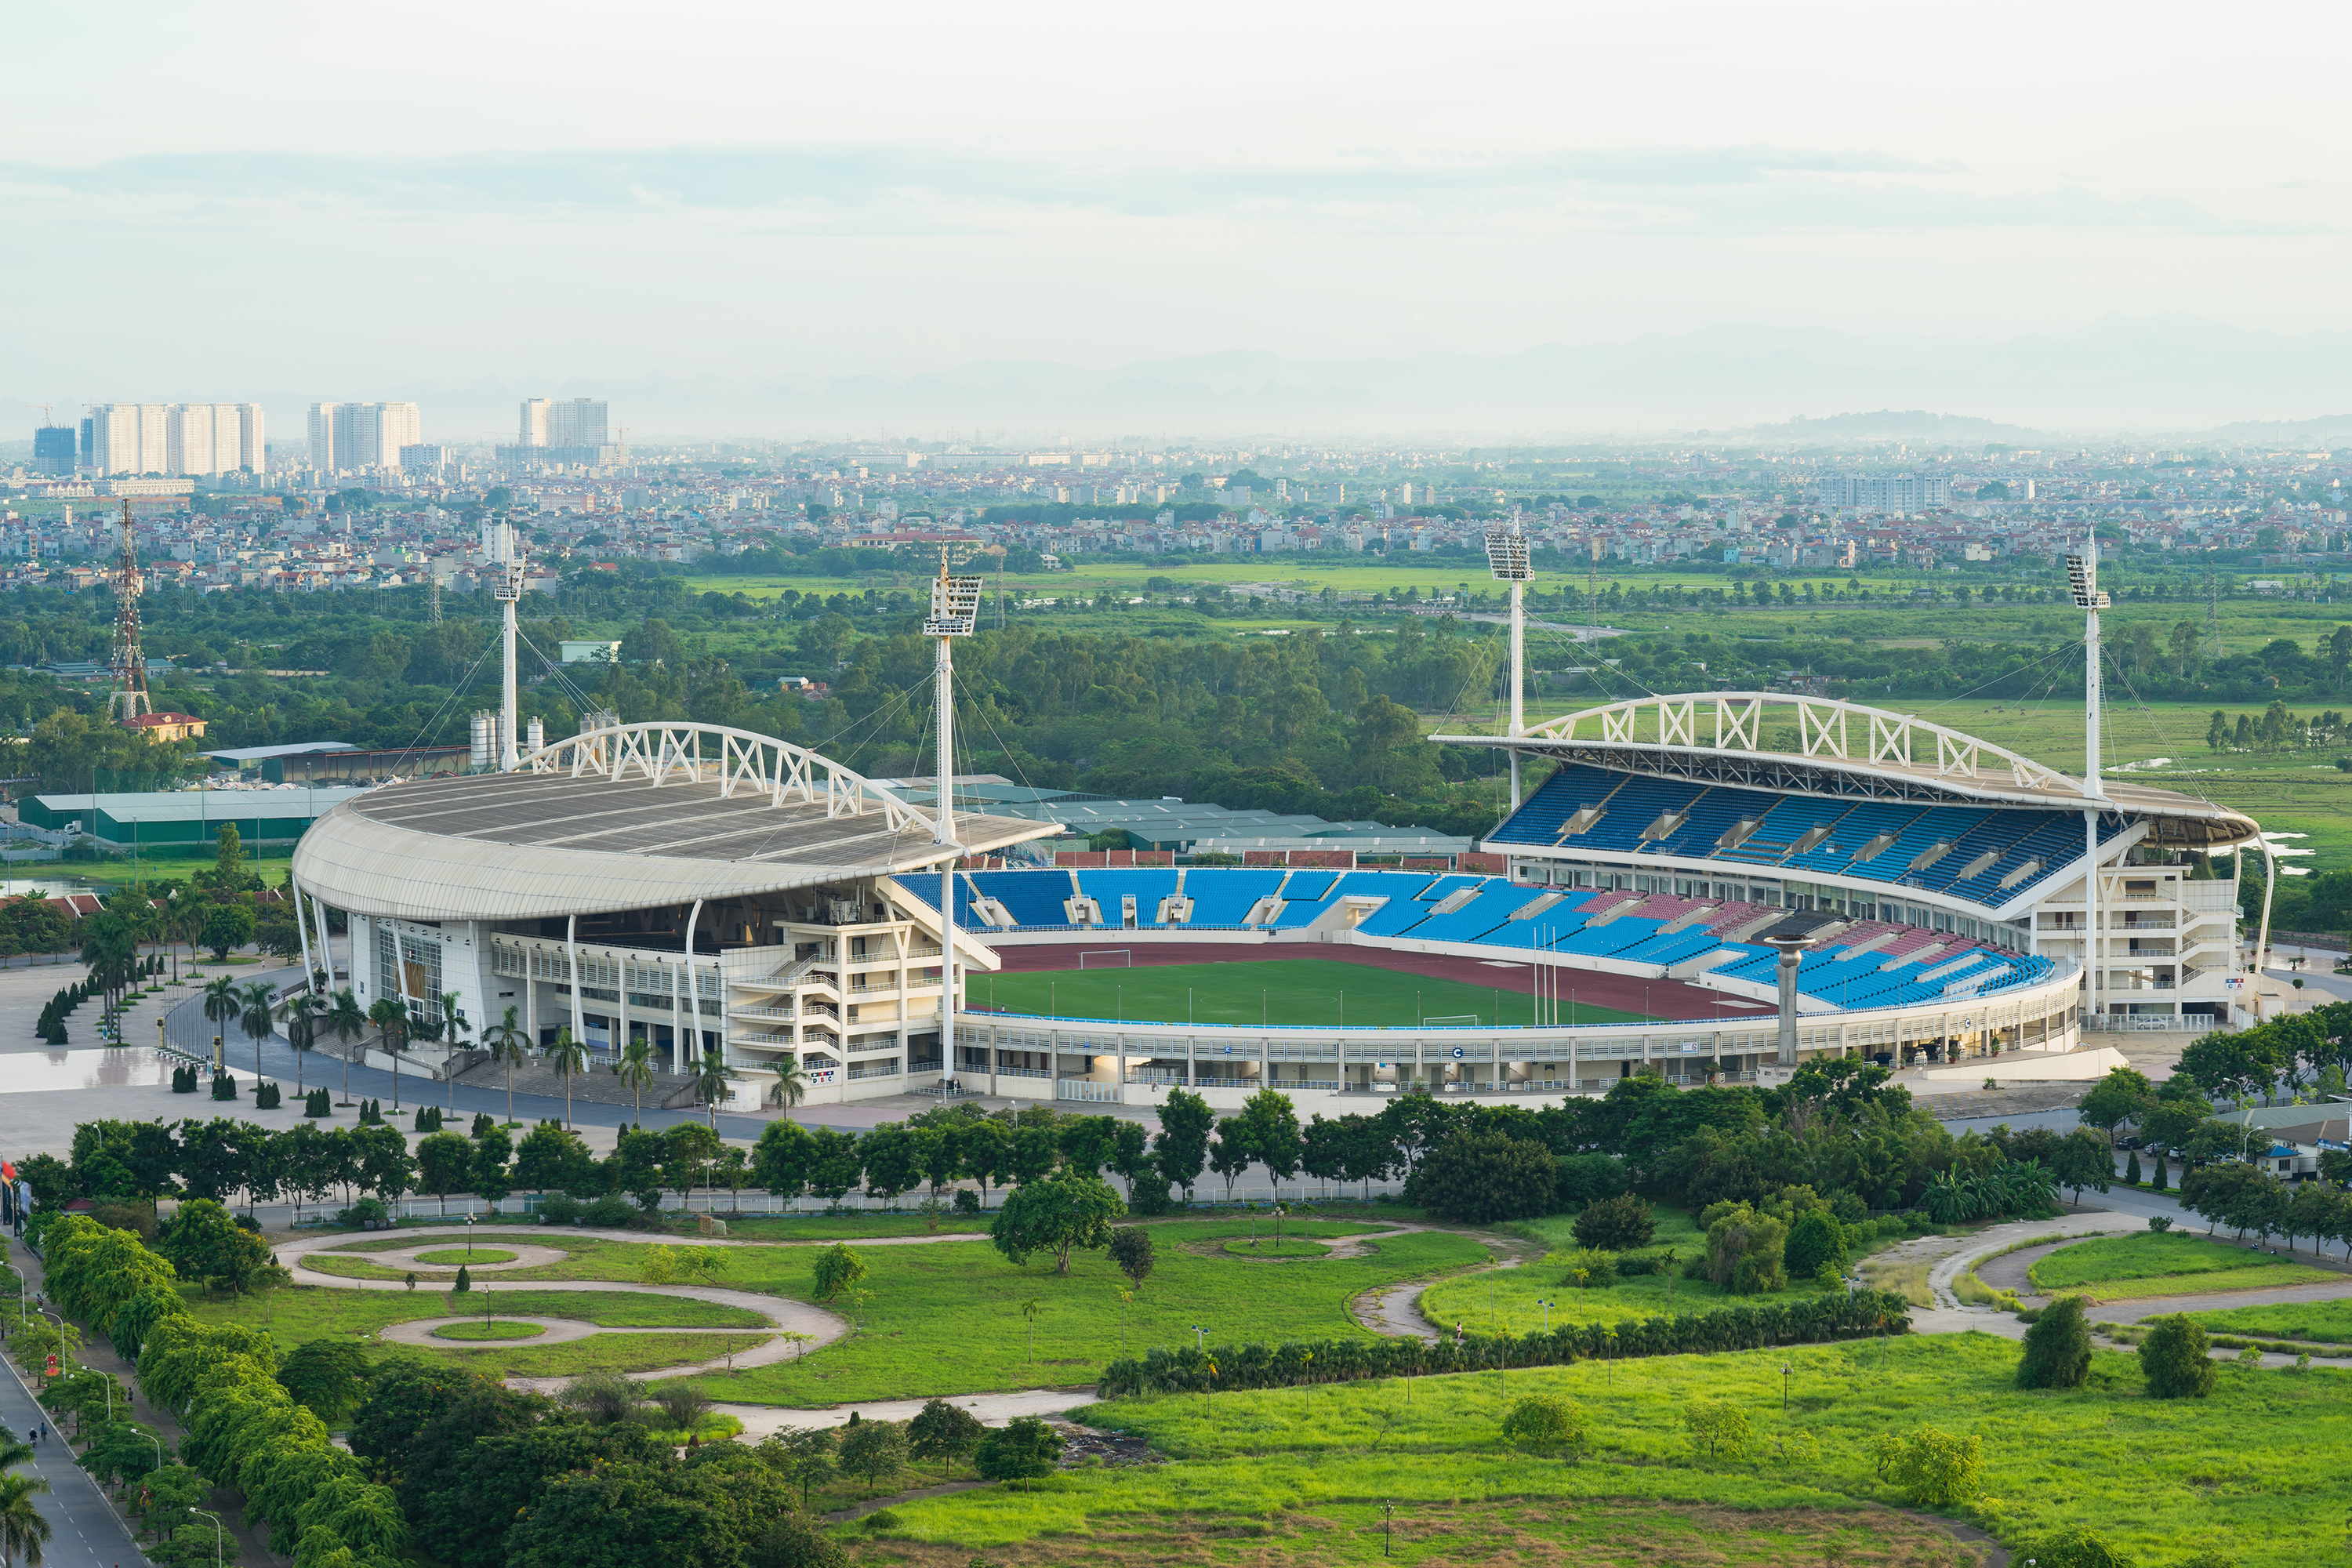 SEA Games in 2022: Day one - as it happened